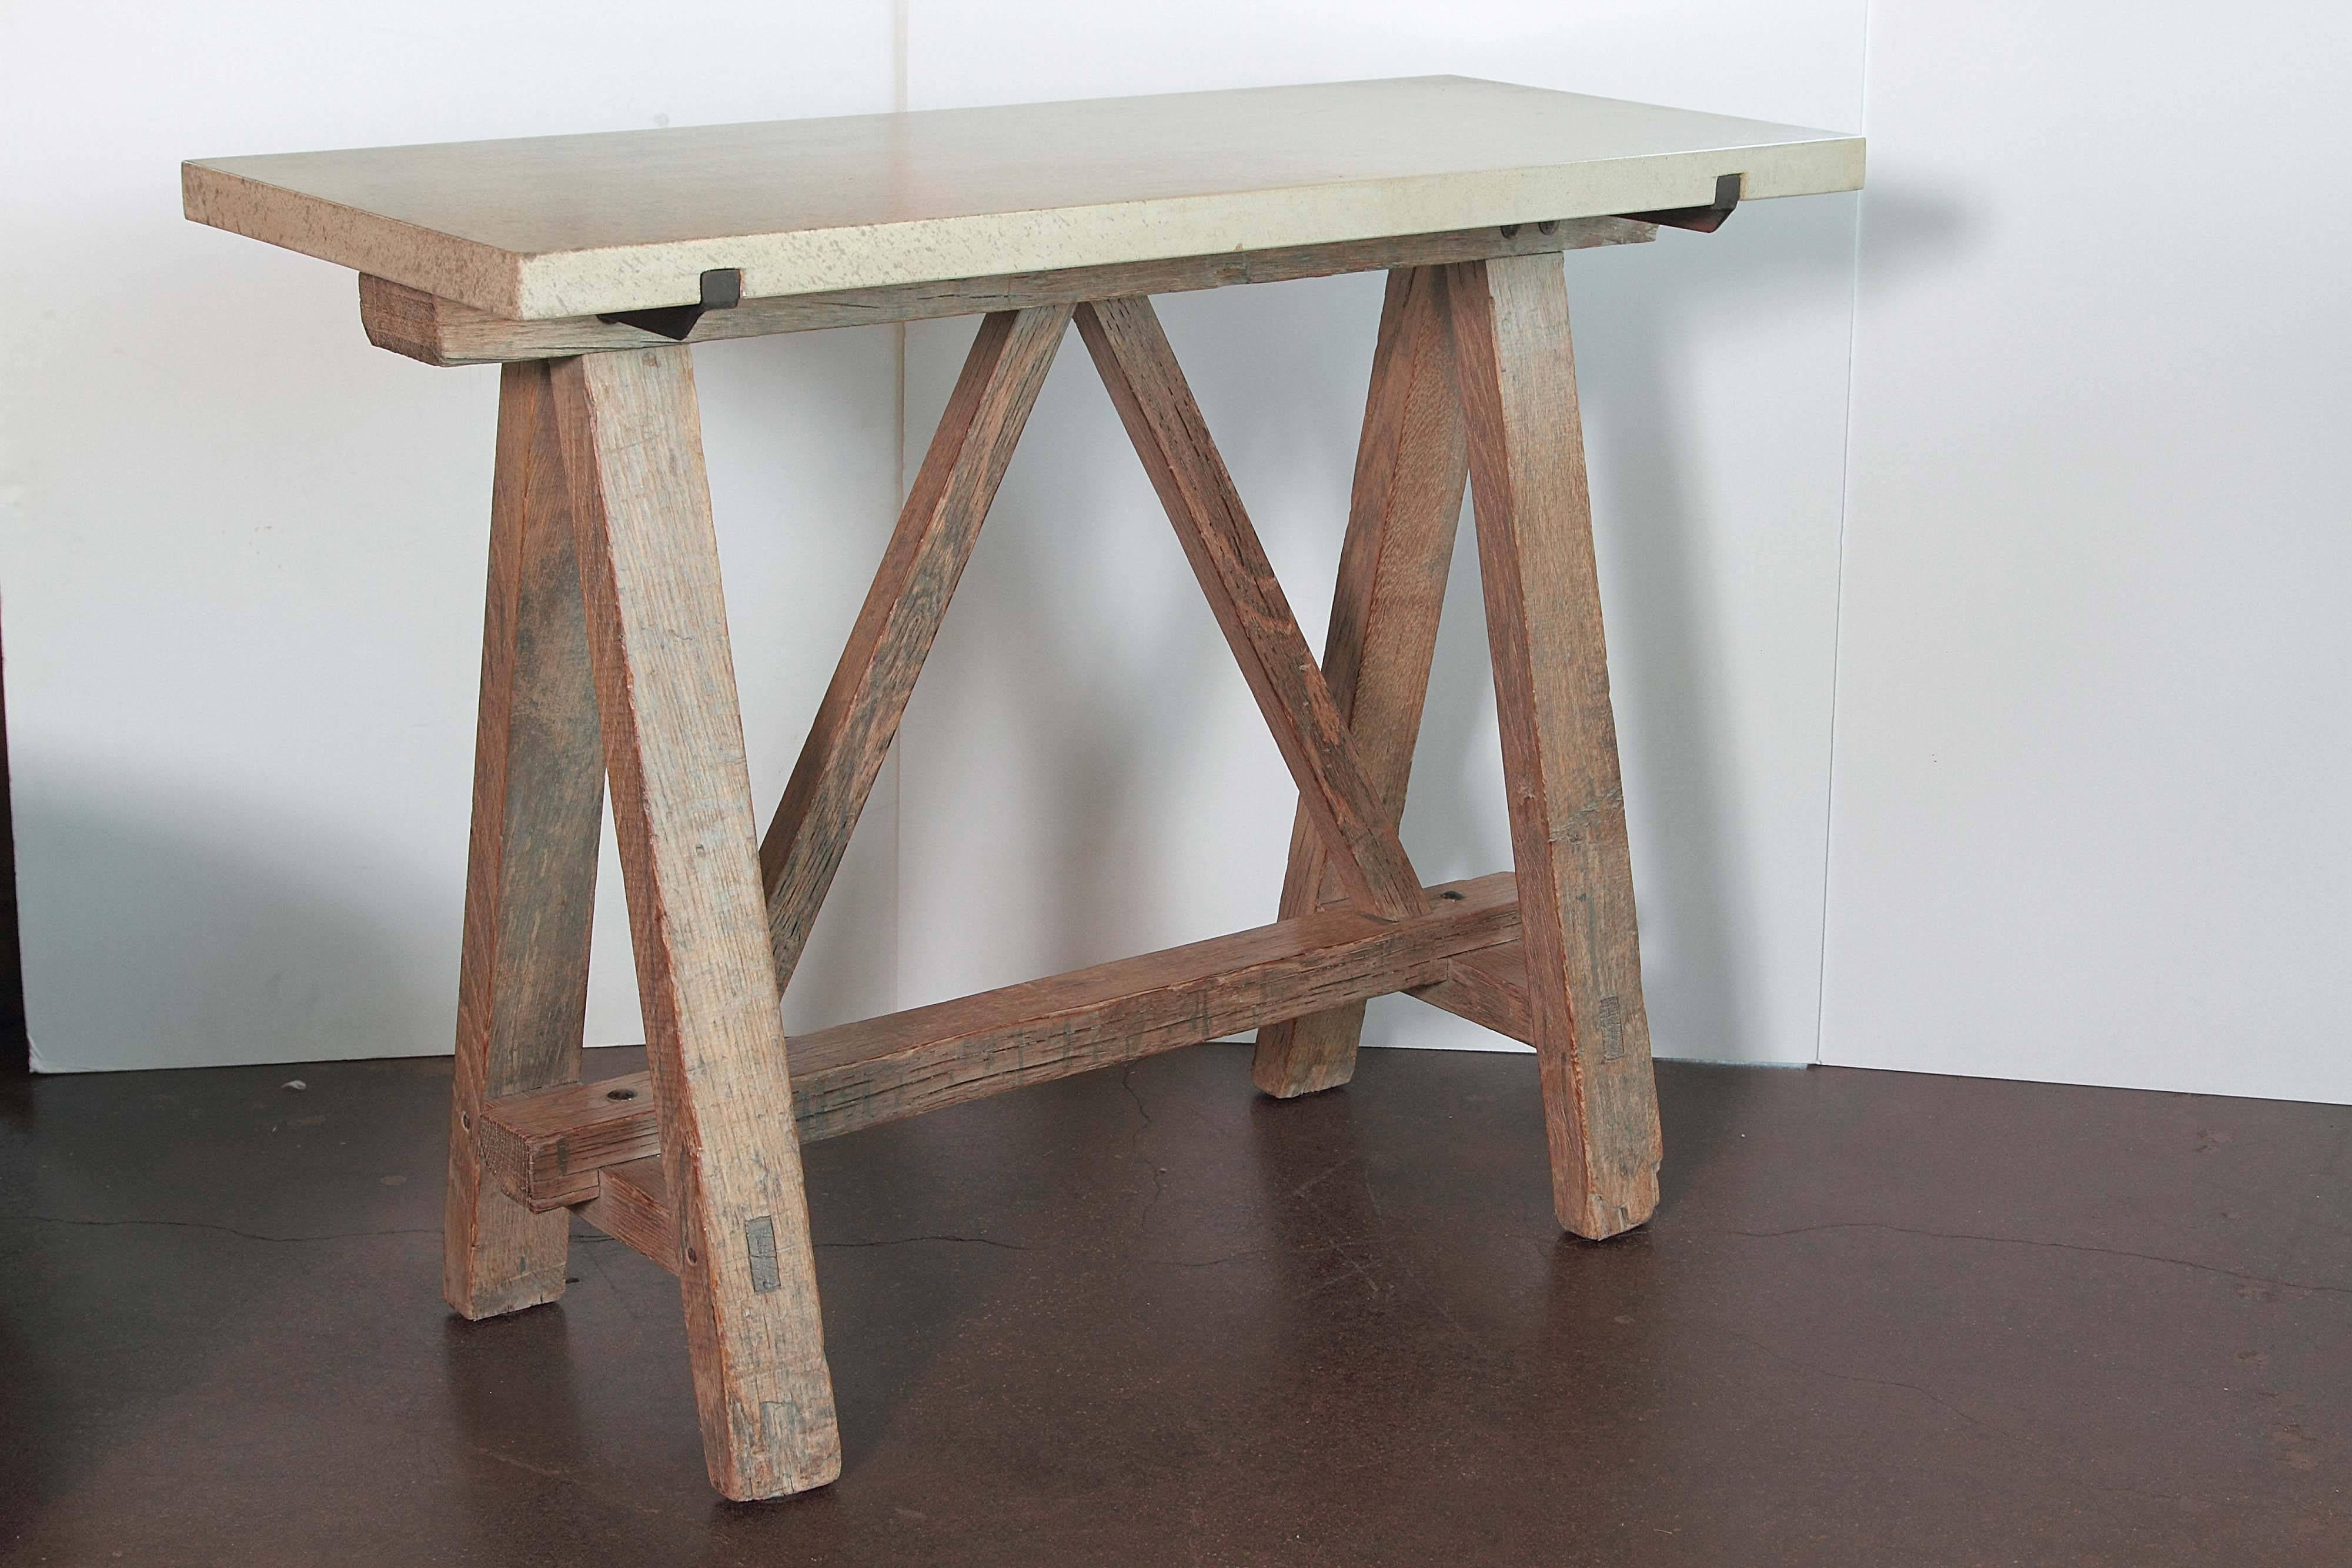 Limestone Antique French Blond Oak Saw Horse Entry Tables, circa 1910